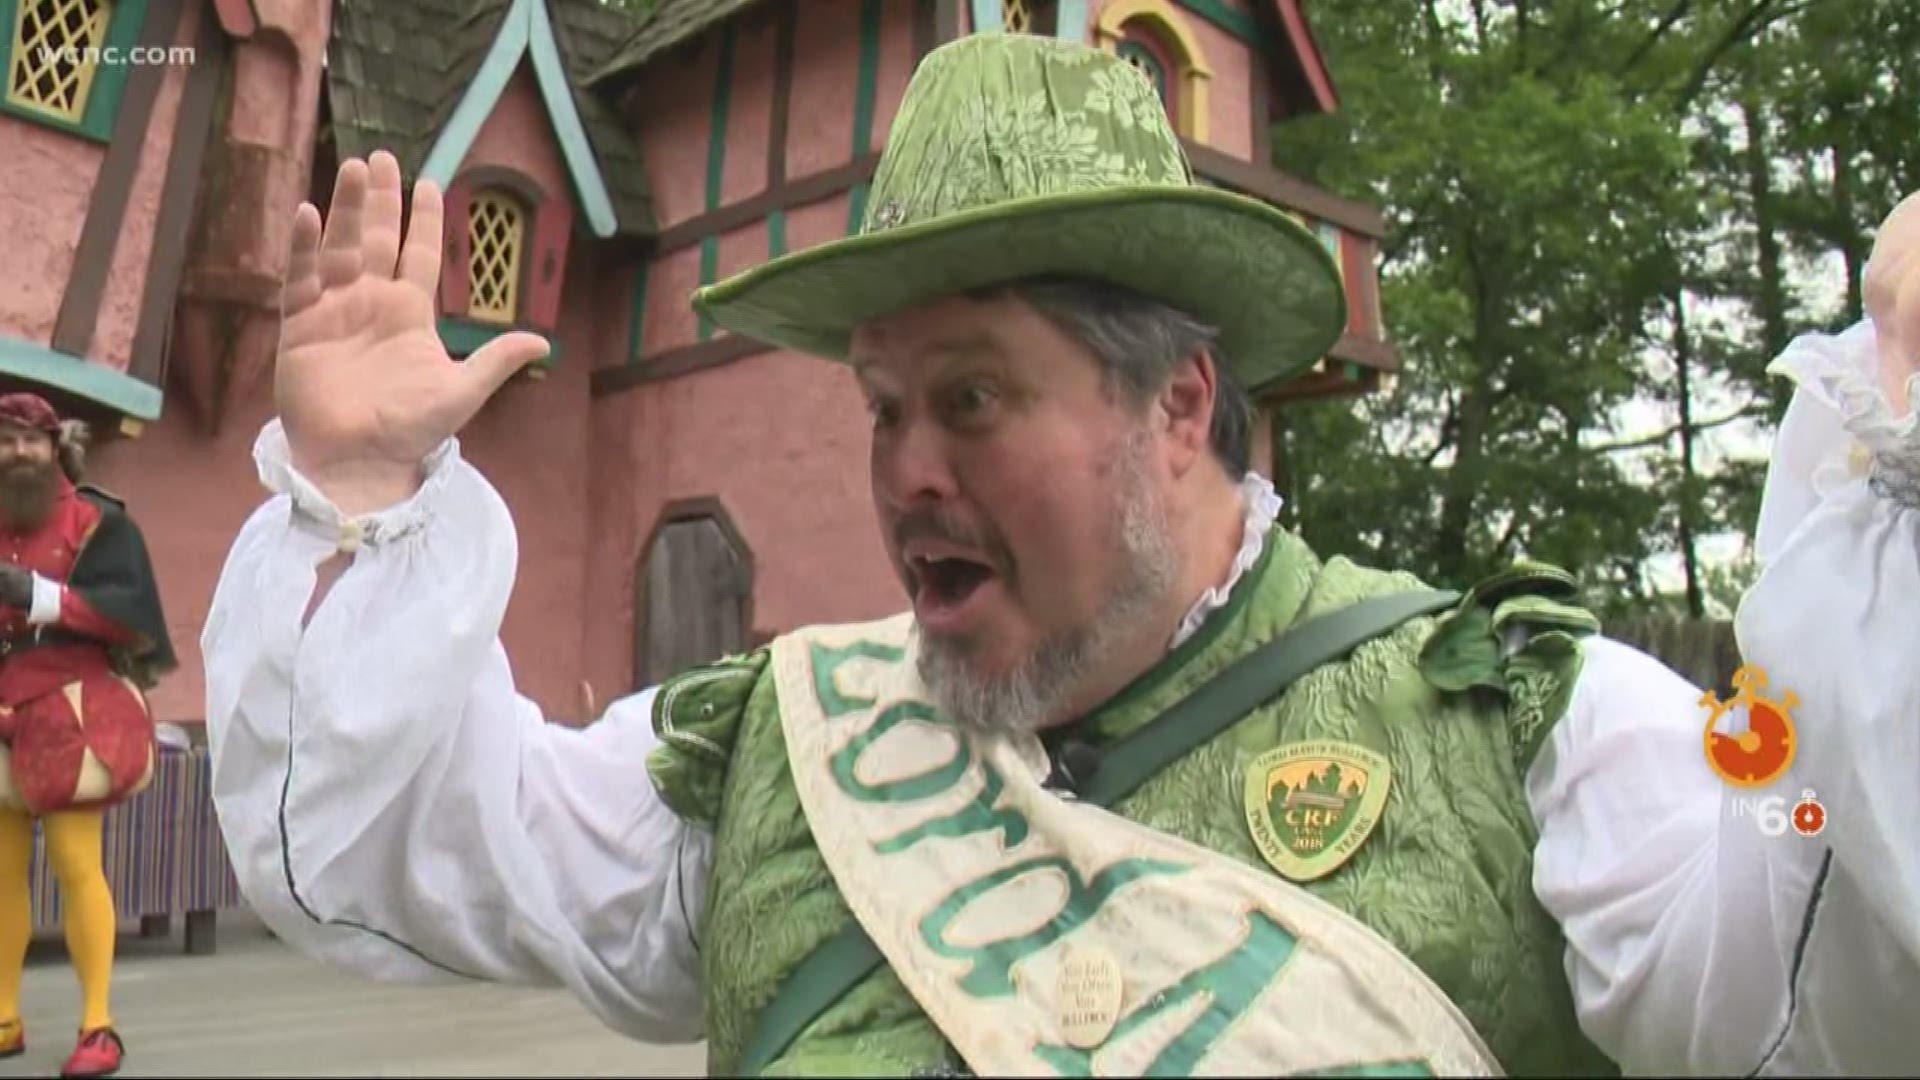 Take a trip back in time to 16th century Europe at the Carolina Renaissance Festival. Here's how you can audition to be a part of the annual event.